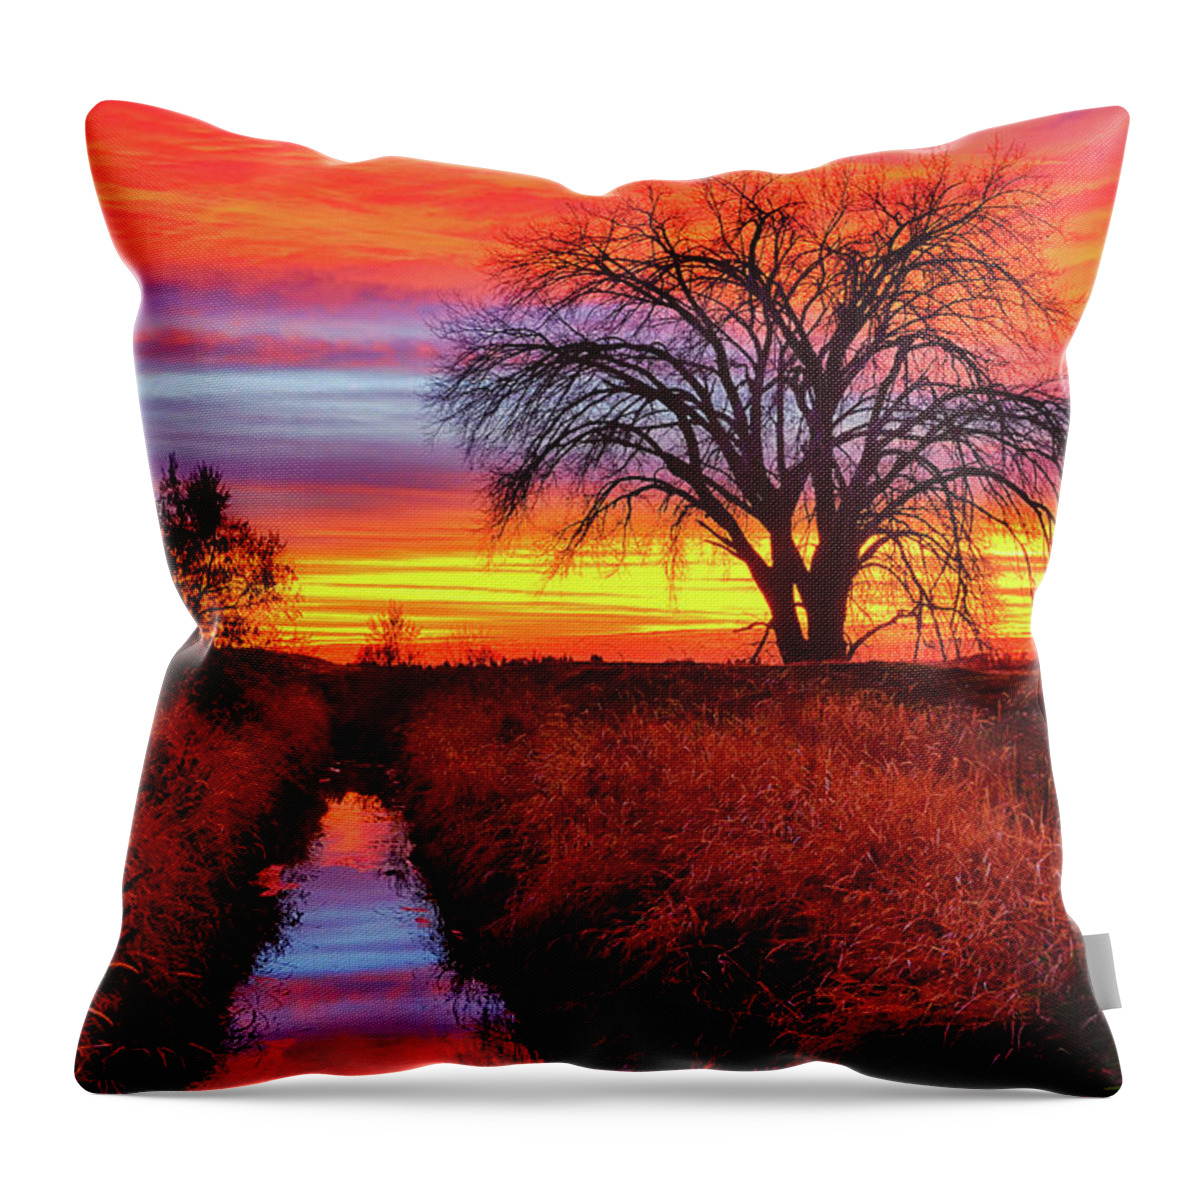 Sunset Throw Pillow featuring the photograph On The Horizon by Greg Norrell